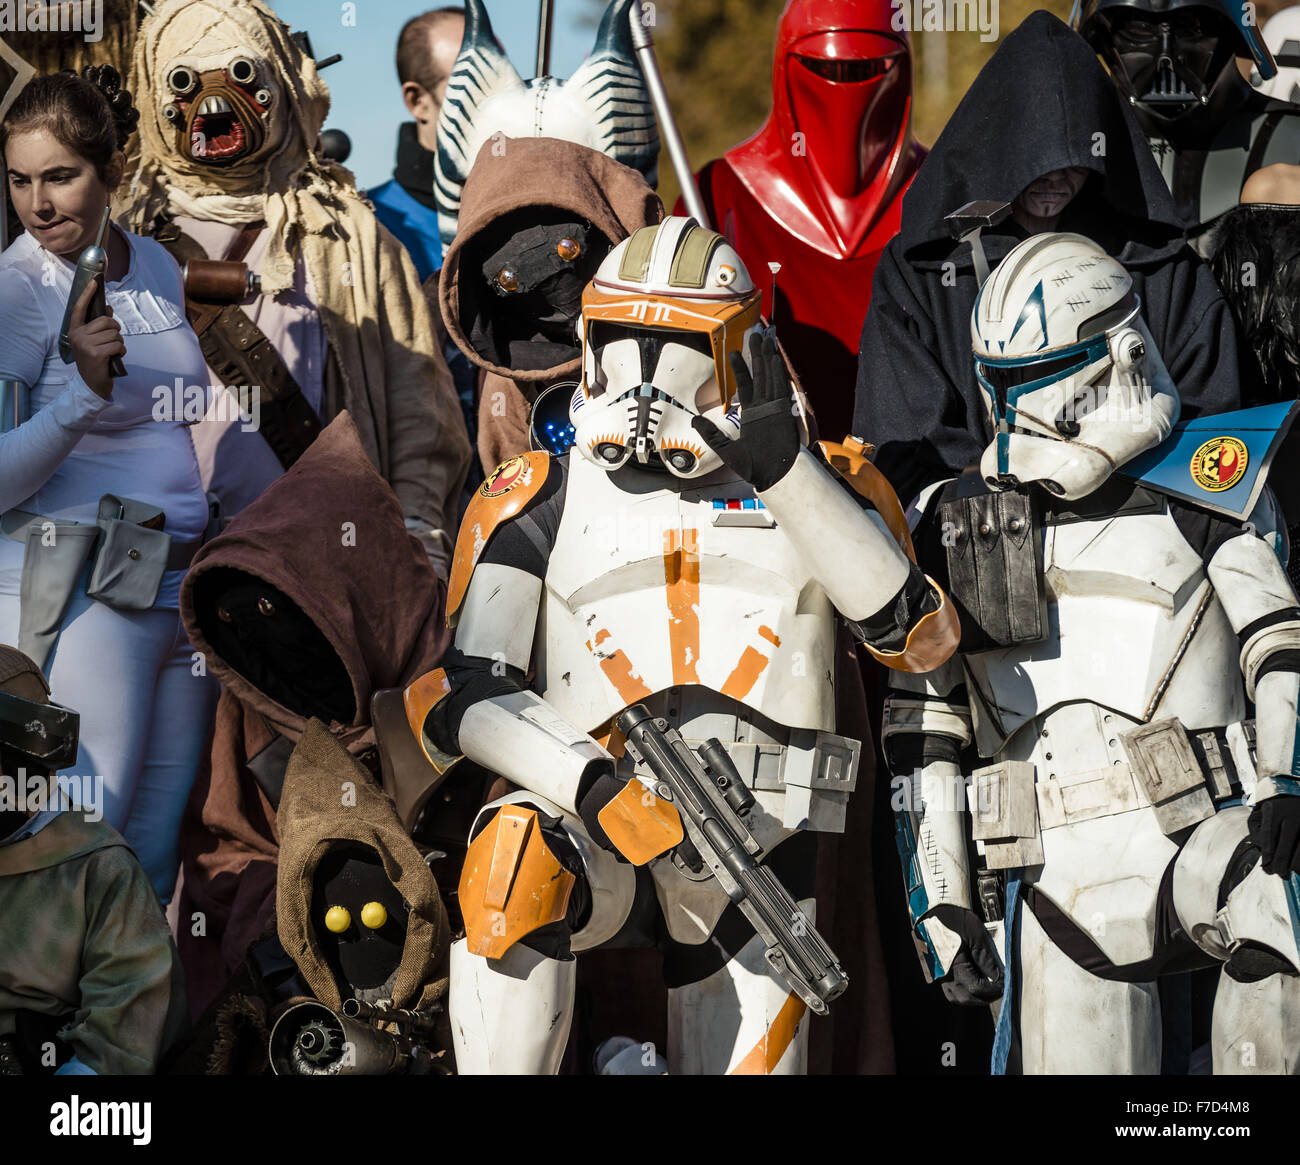 Barcelona, Catalonia, Spain. 29th Nov, 2015. Participants of the 9th Star Wars parade pose for a family photo in their costumes in front of Barcelona's Arc de Triomf © Matthias Oesterle/ZUMA Wire/Alamy Live News Stock Photo